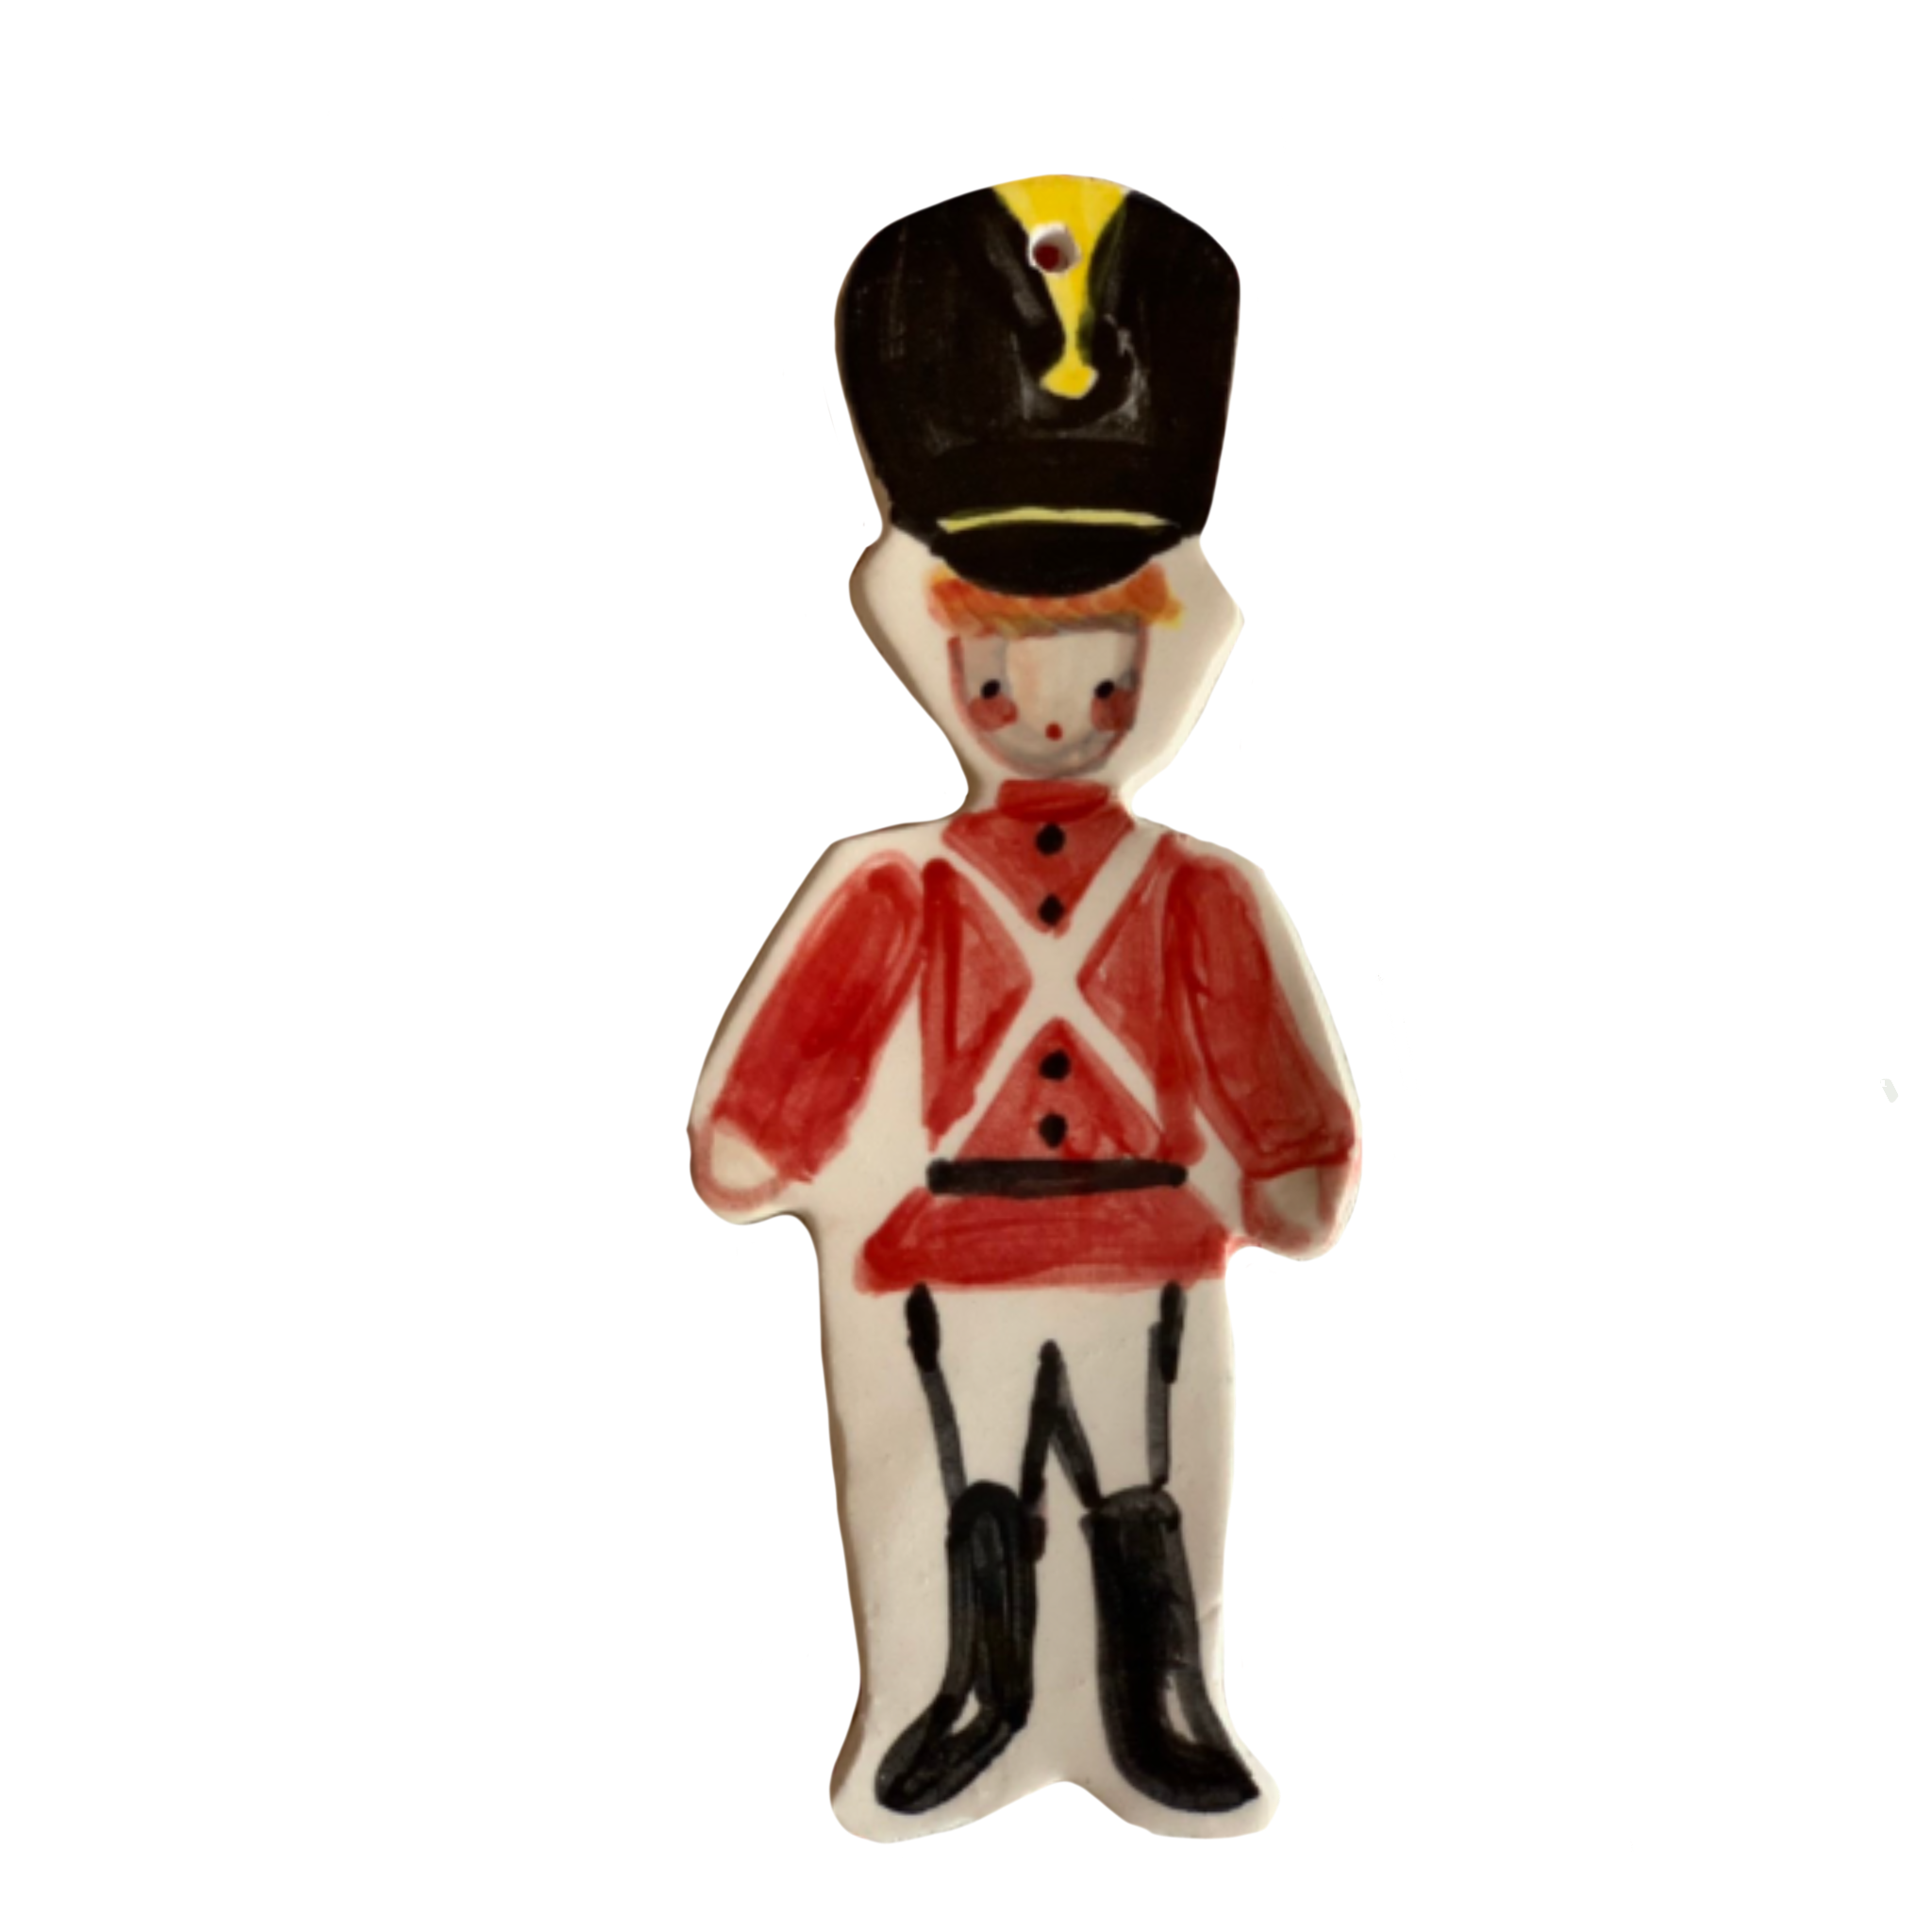 Royal Guard - Toy Soldier Ornament